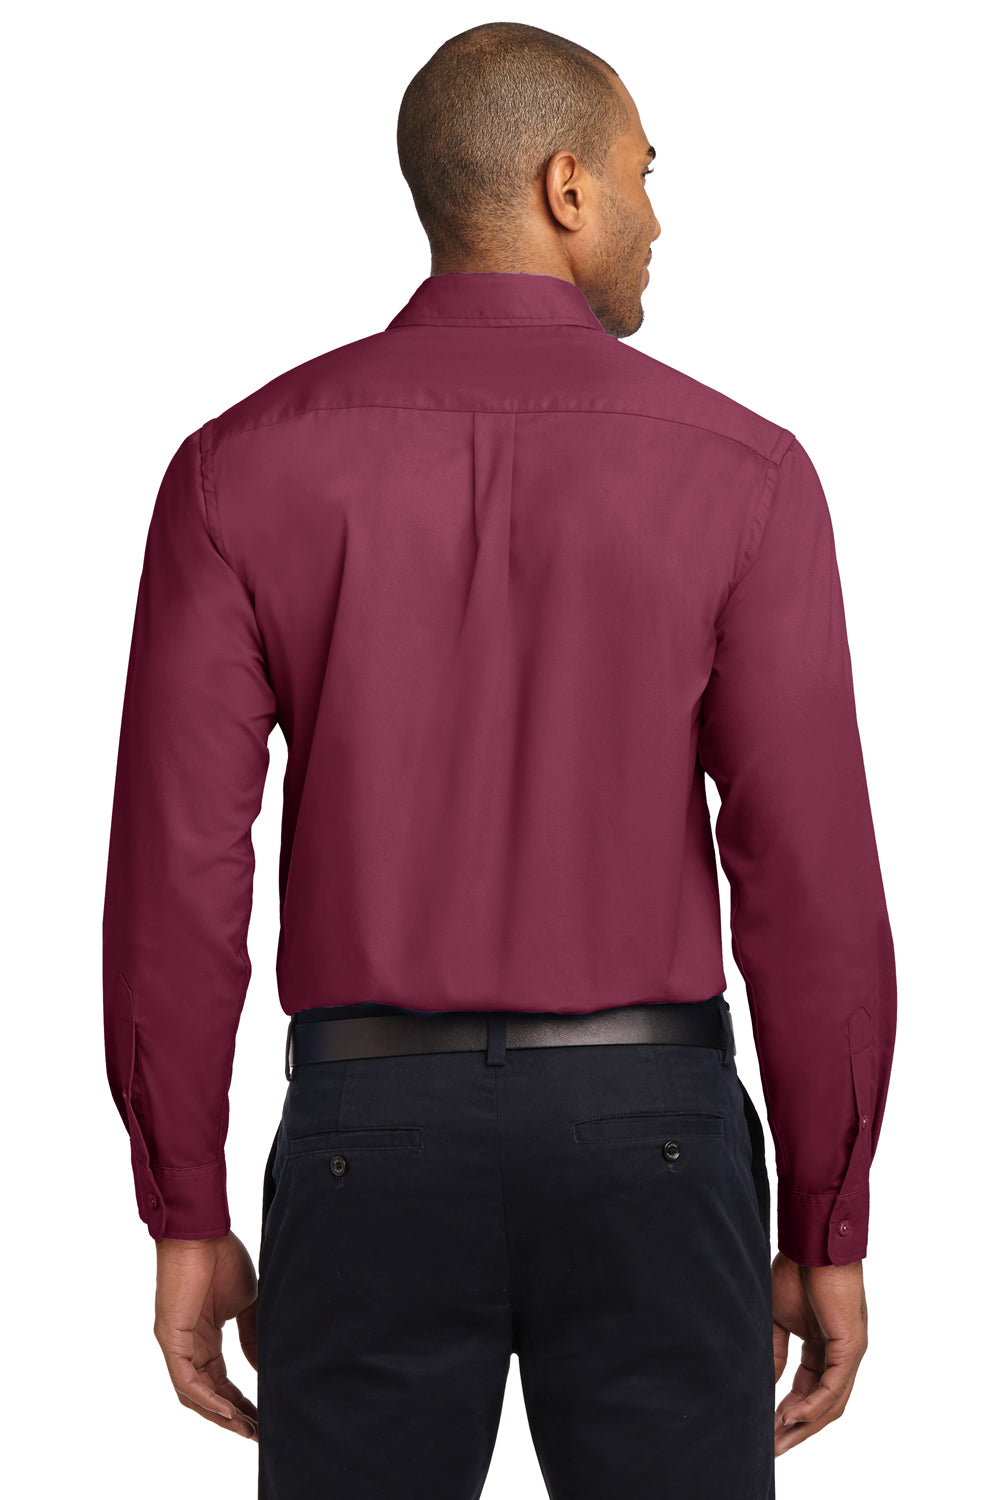 Port Authority S608/TLS608/S608ES Mens Easy Care Wrinkle Resistant Long Sleeve Button Down Shirt w/ Pocket Burgundy Back